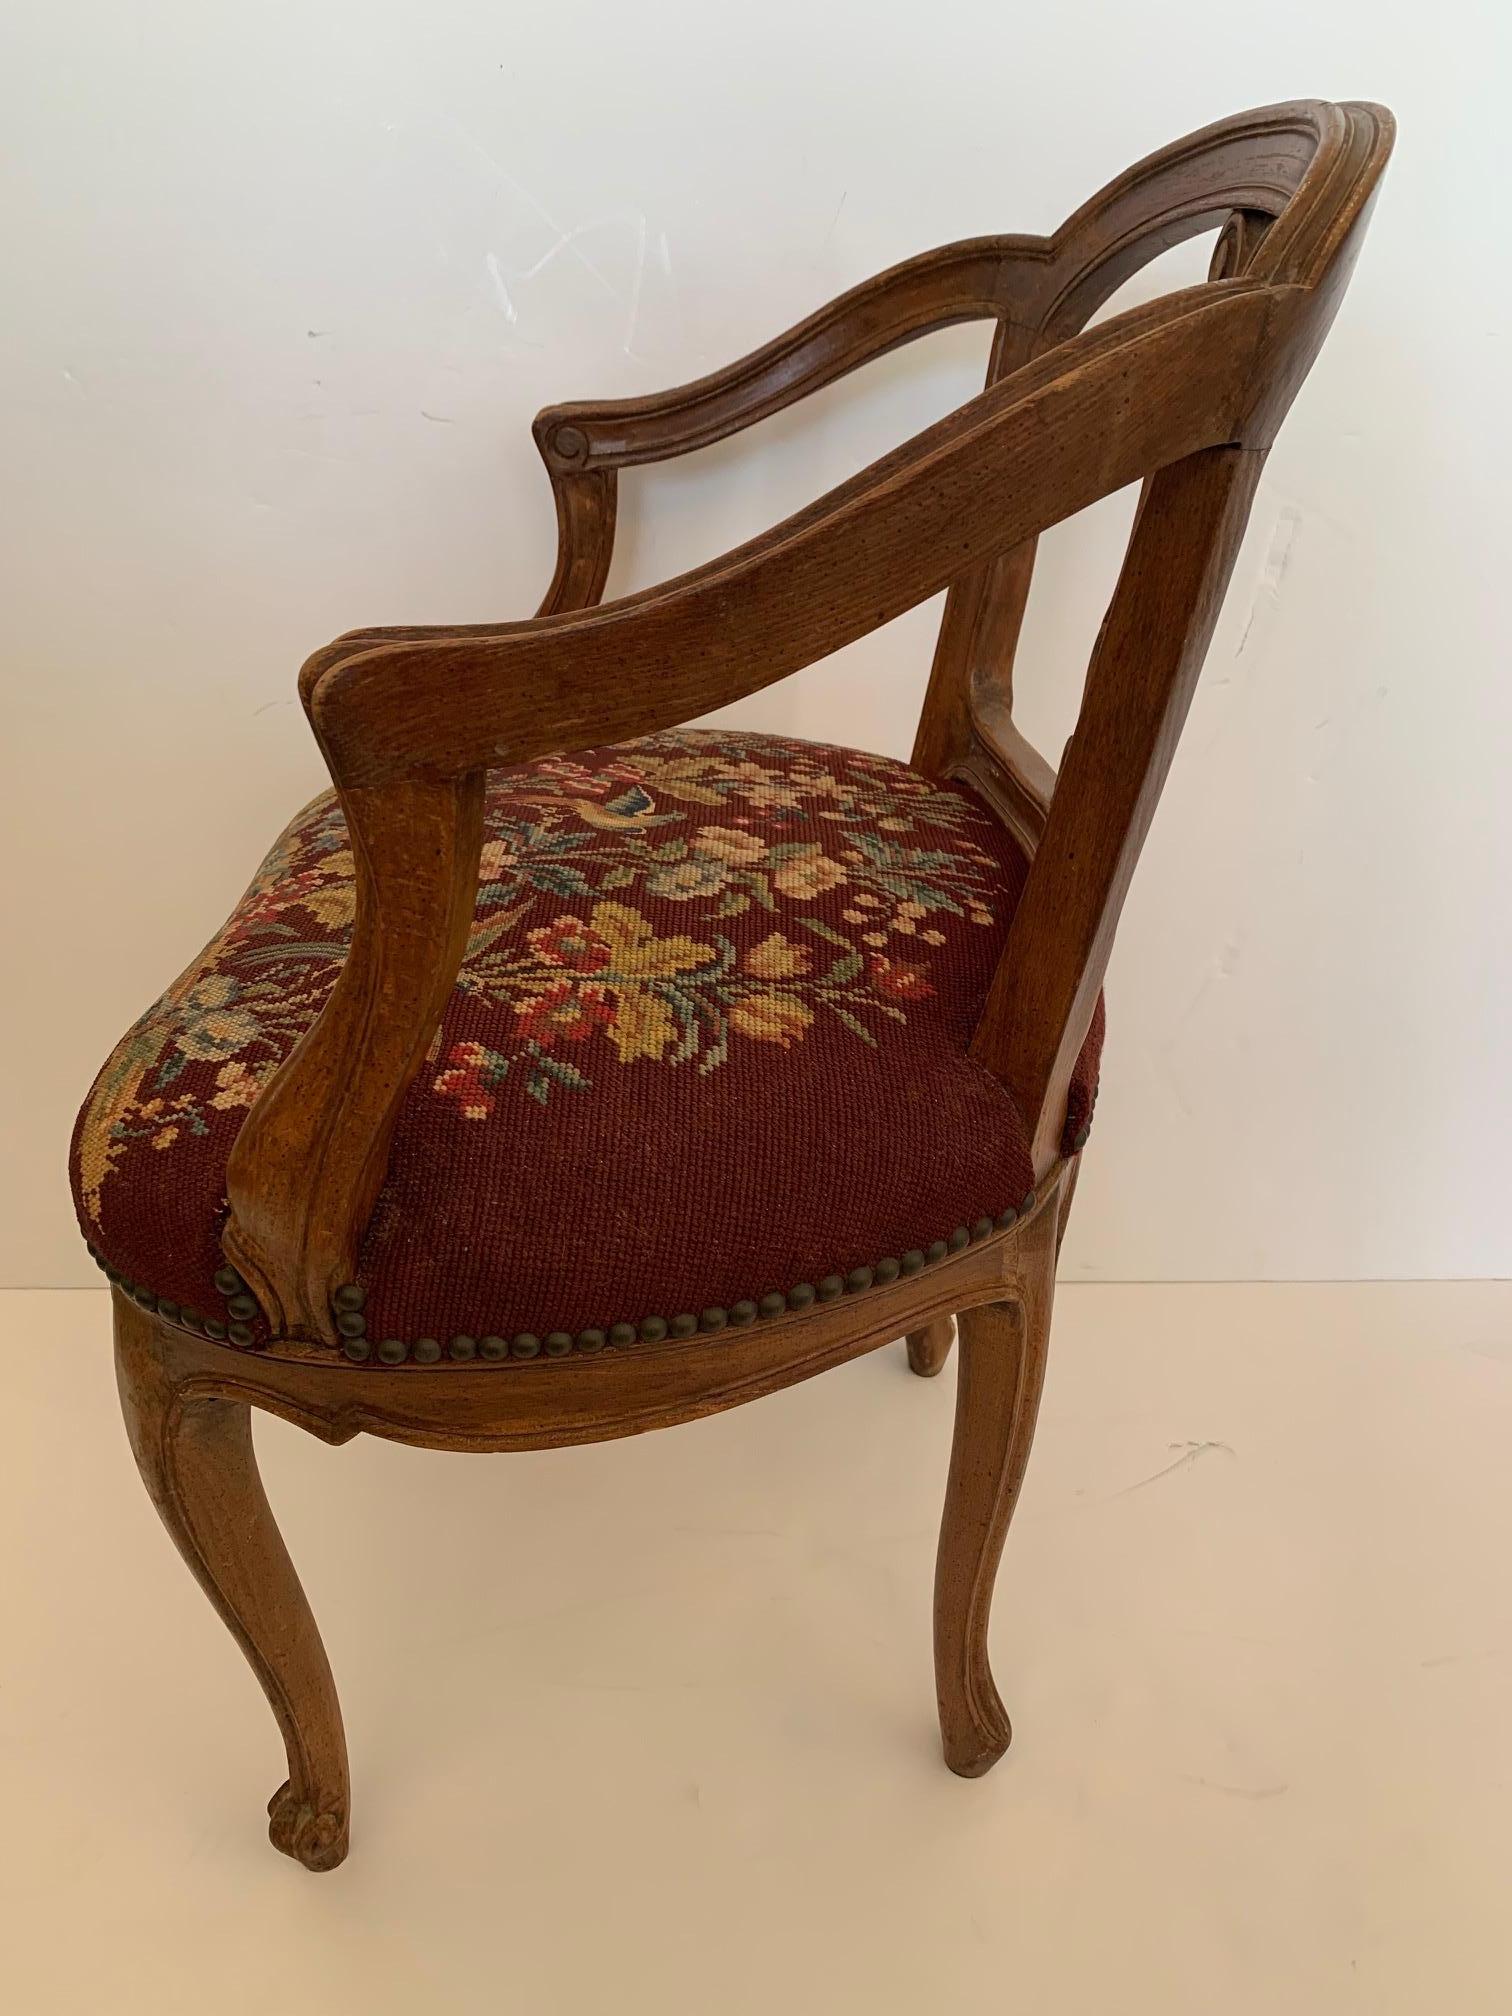 Curved Antique French Walnut Salon Chair with Lovely Needlepoint Seat In Good Condition For Sale In Hopewell, NJ